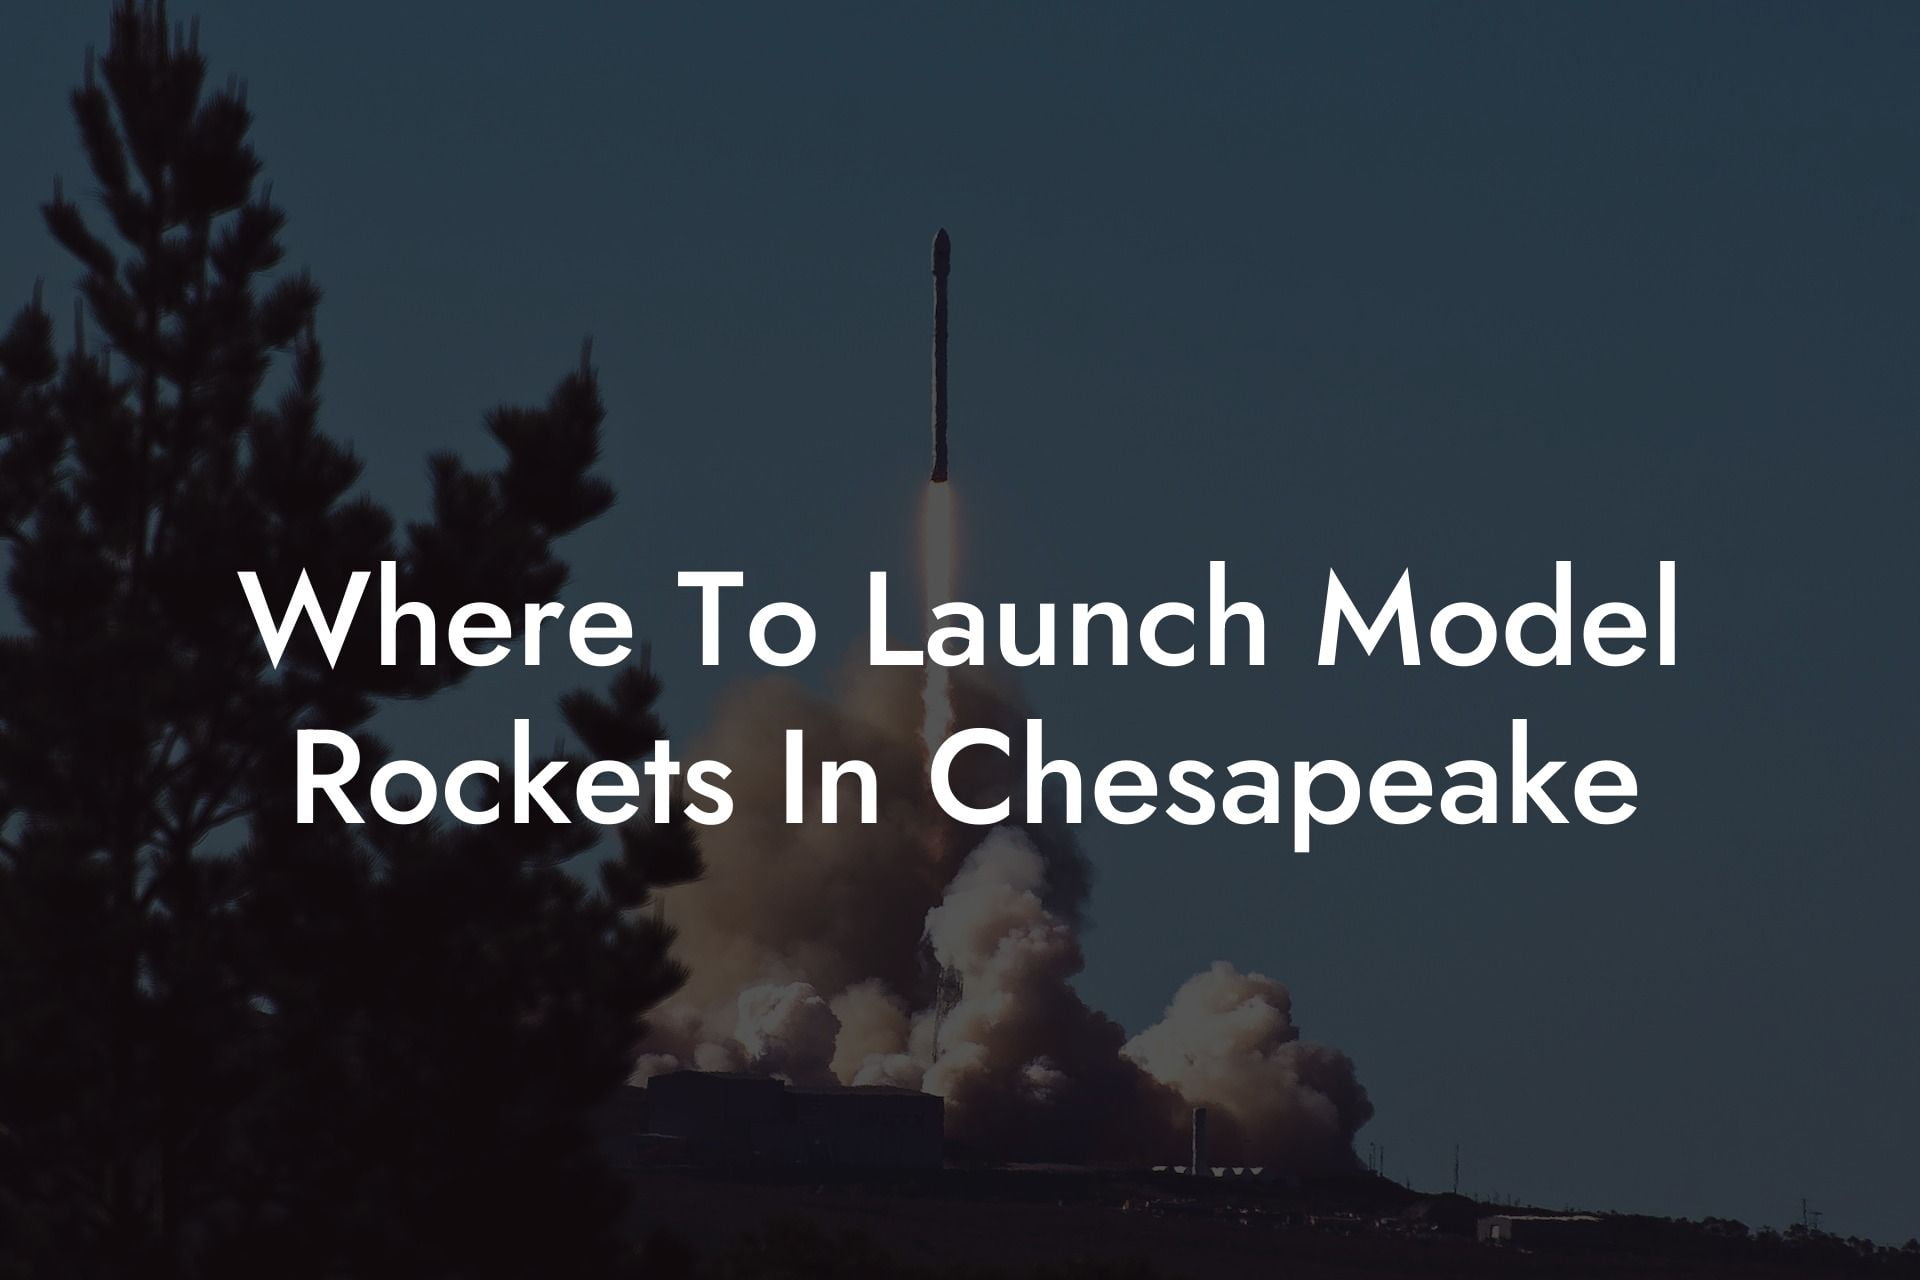 Where To Launch Model Rockets In Chesapeake